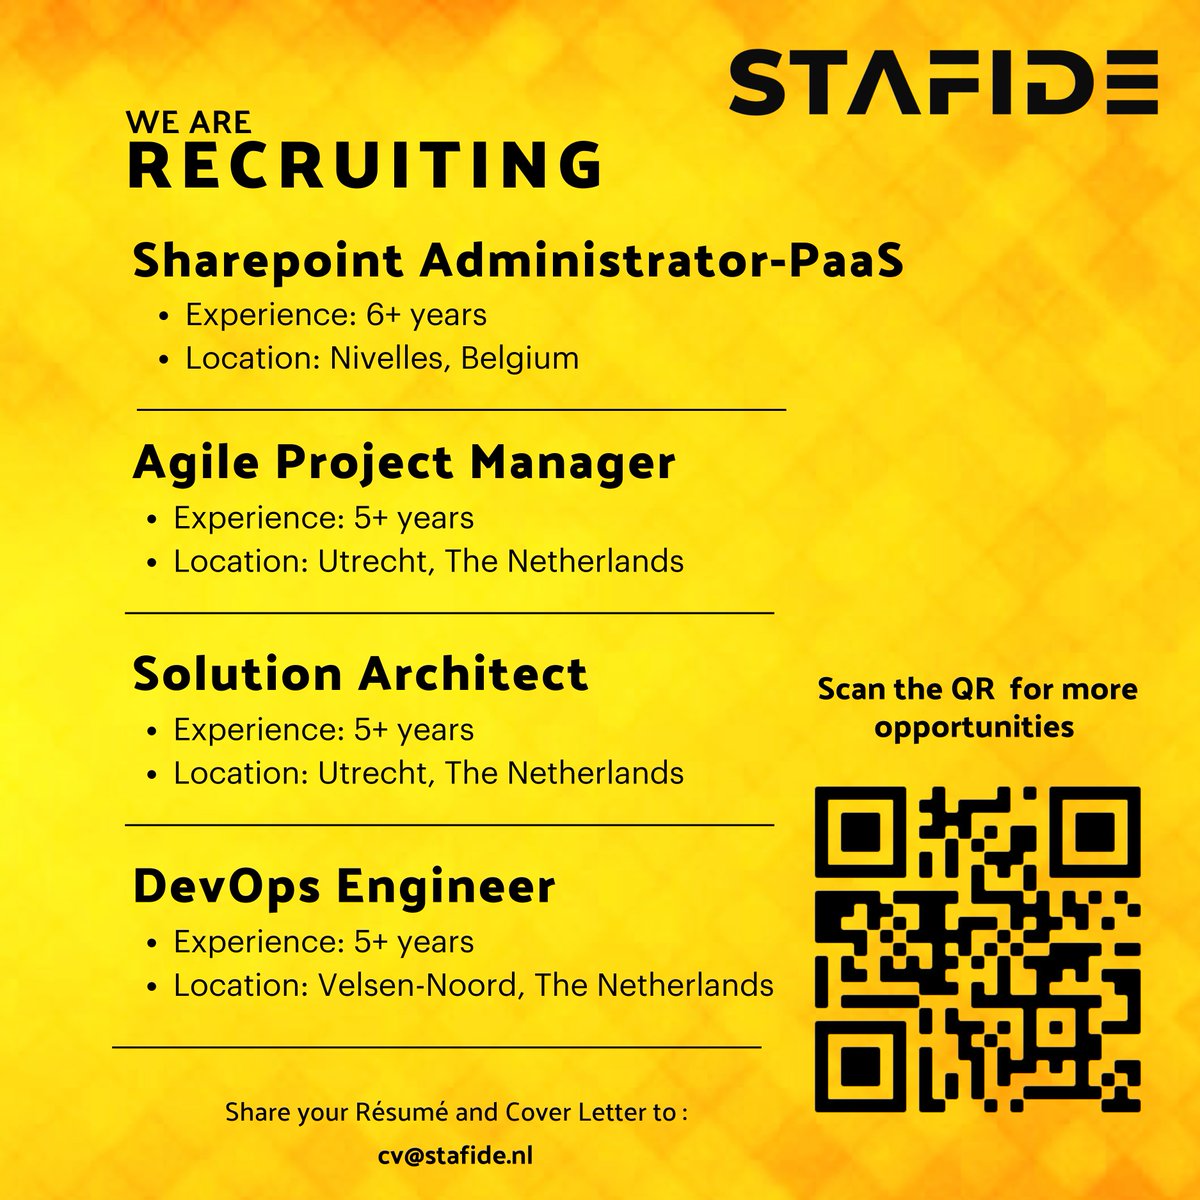 Join the journey of innovation at Stafide! We're looking for talented individuals to join our dynamic team. 

Send your Résumé and Cover Letter to - cv@stafide.nl
#netherlandsjobs #AmsterdamJobs #nljobs #recruitment #career #CareerOpportunity #TechCareers #BuildTheFuture